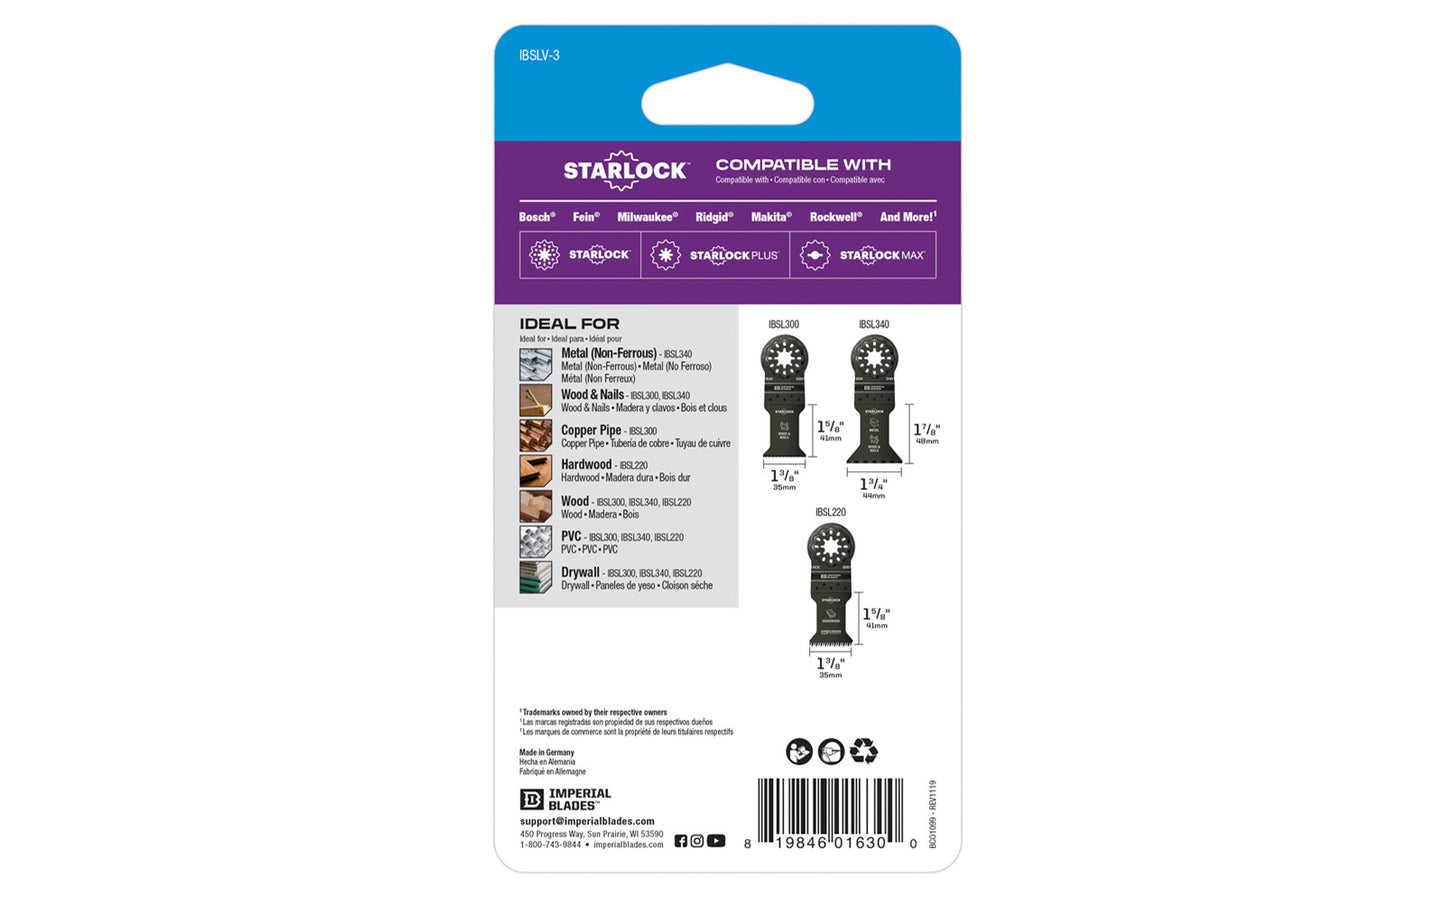 Imperial Blades "Starlock" Standard All-Purpose 3-PC Variety Pack. Includes standard all-purpose blades for an assortment of applications. Recommended applications: Metal (Non-Ferrous), Wood & Nails, Copper Pipe, Hardwood, Wood, PVC, Drywall.  Made in USA. 819846016300. Model IBSLV-3